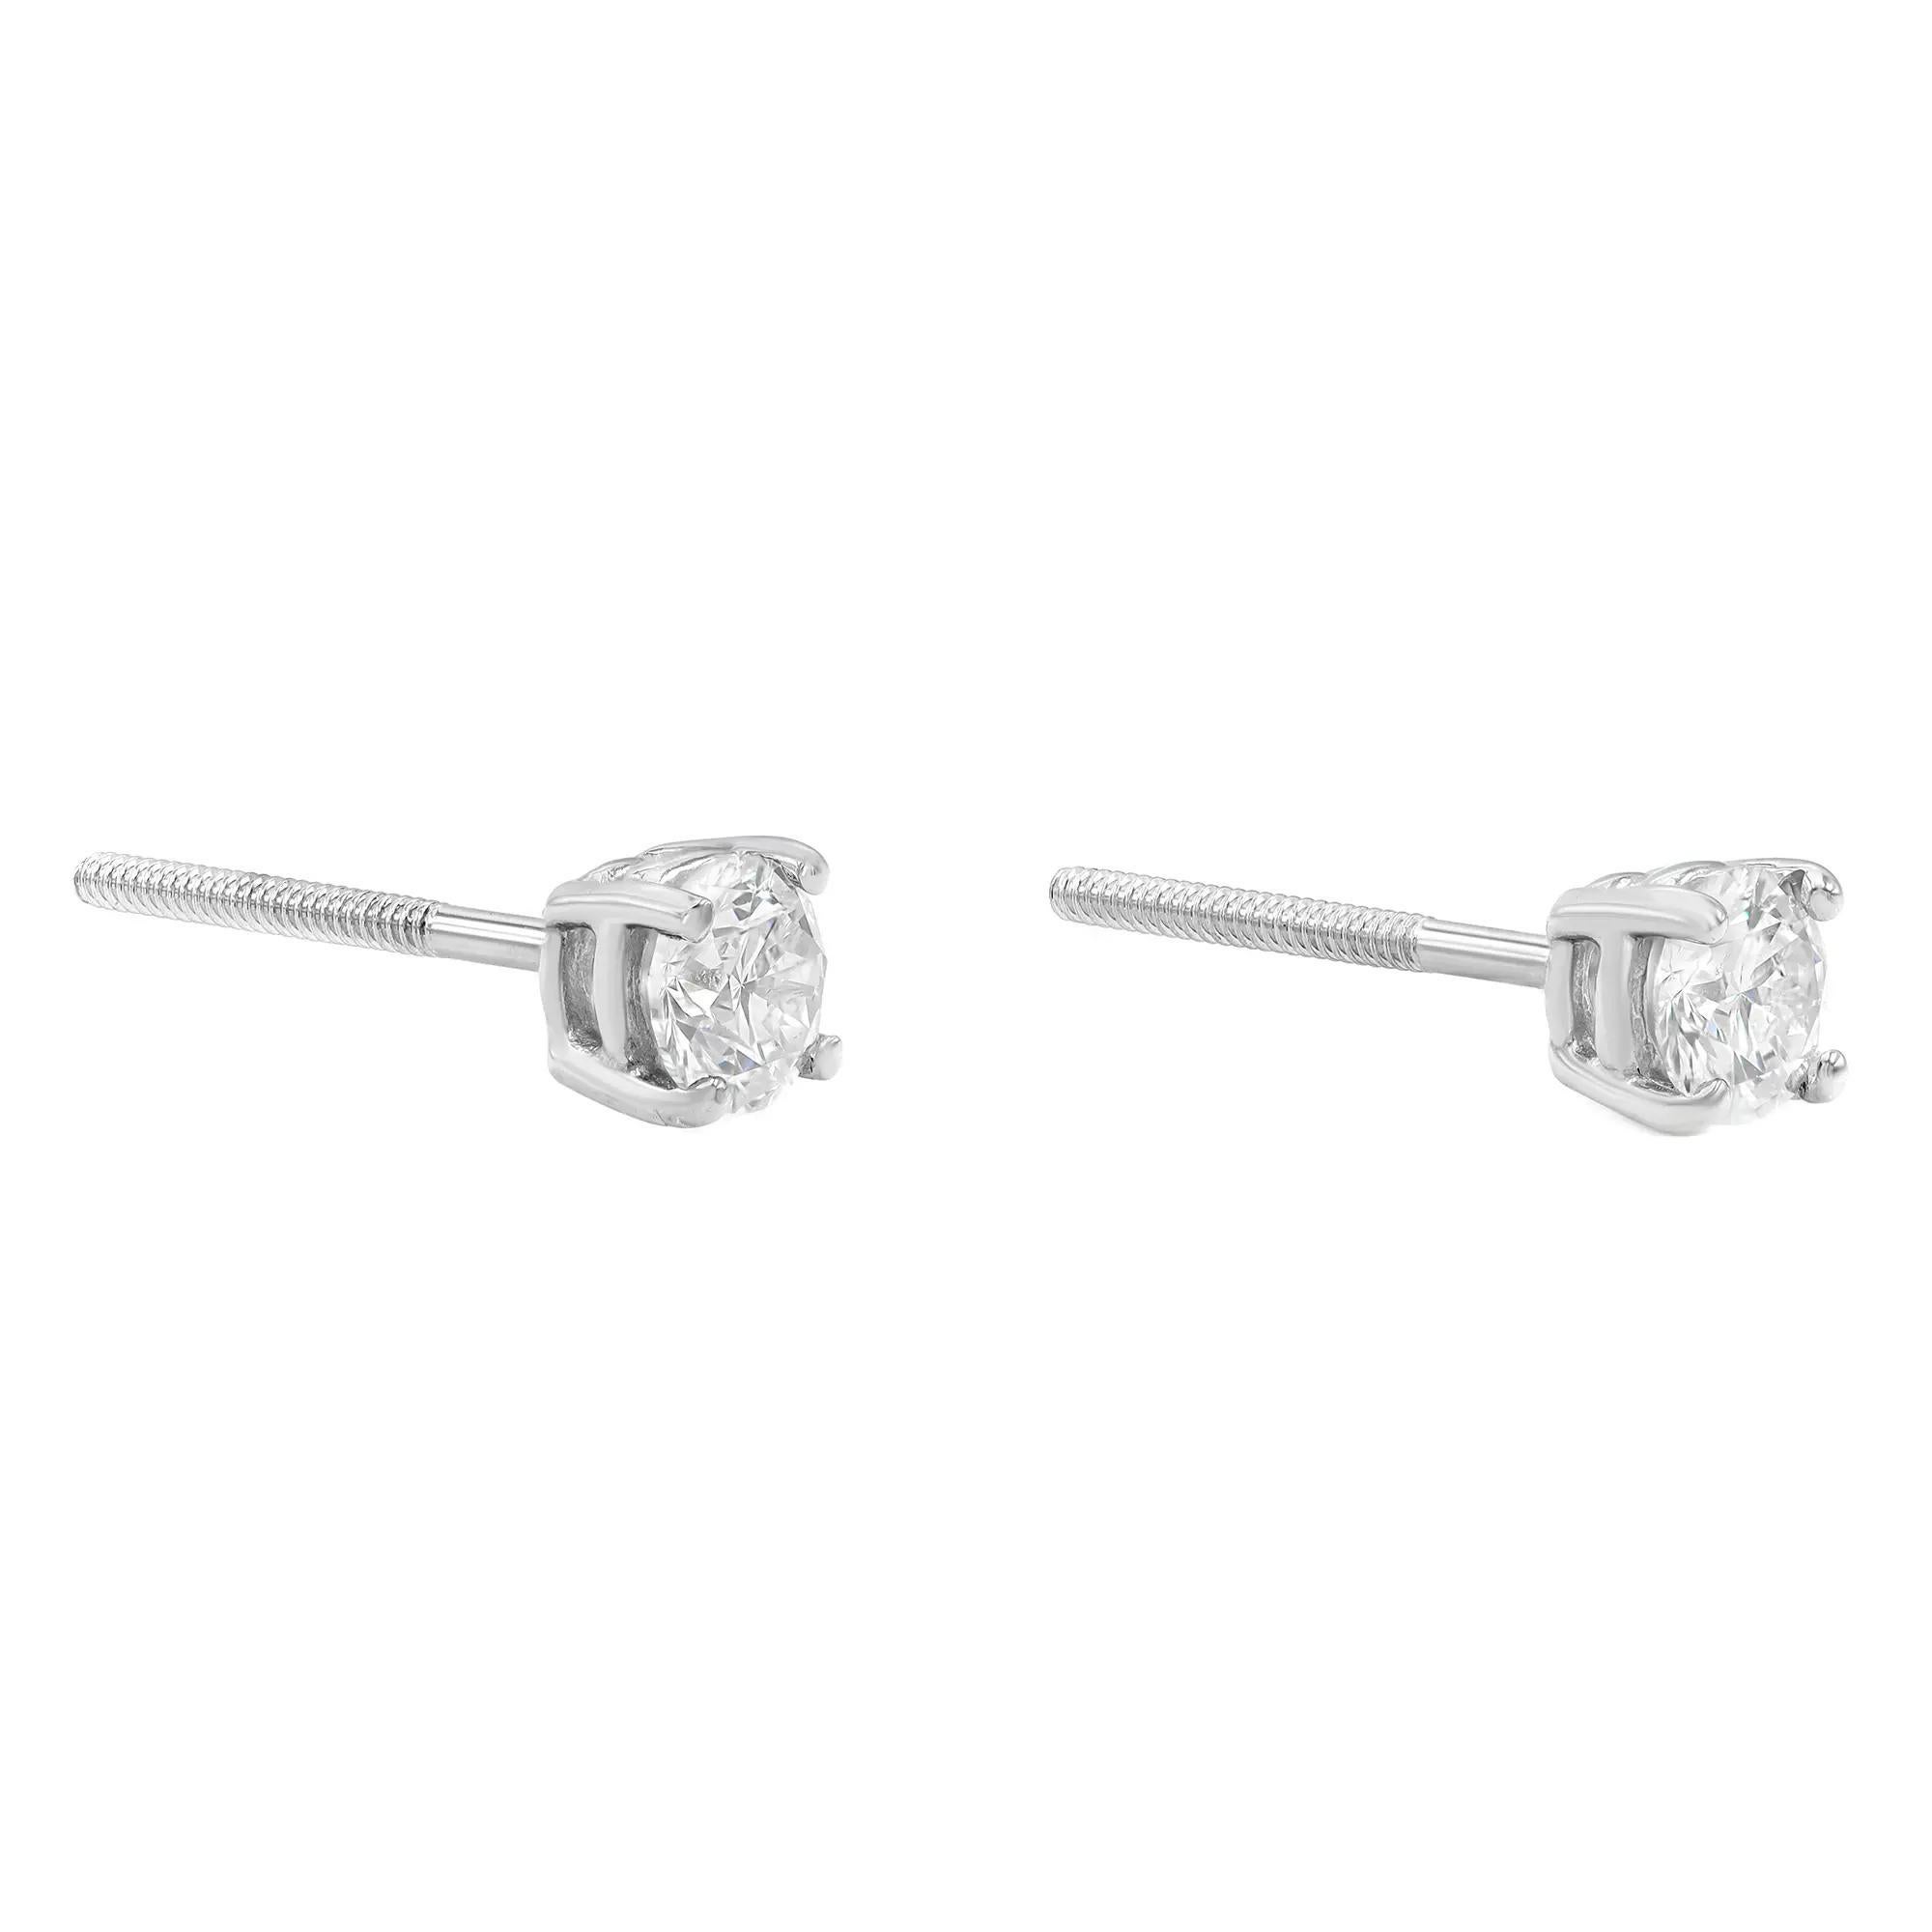 Gleaming with sparkle. Beautifully matched, these diamond stud earrings feature a total of 0.50 carat of round brilliant cut diamond pair with H color and VS2-SI1 clarity. Crafted in high polished 18k white gold with four prong setting. Always in